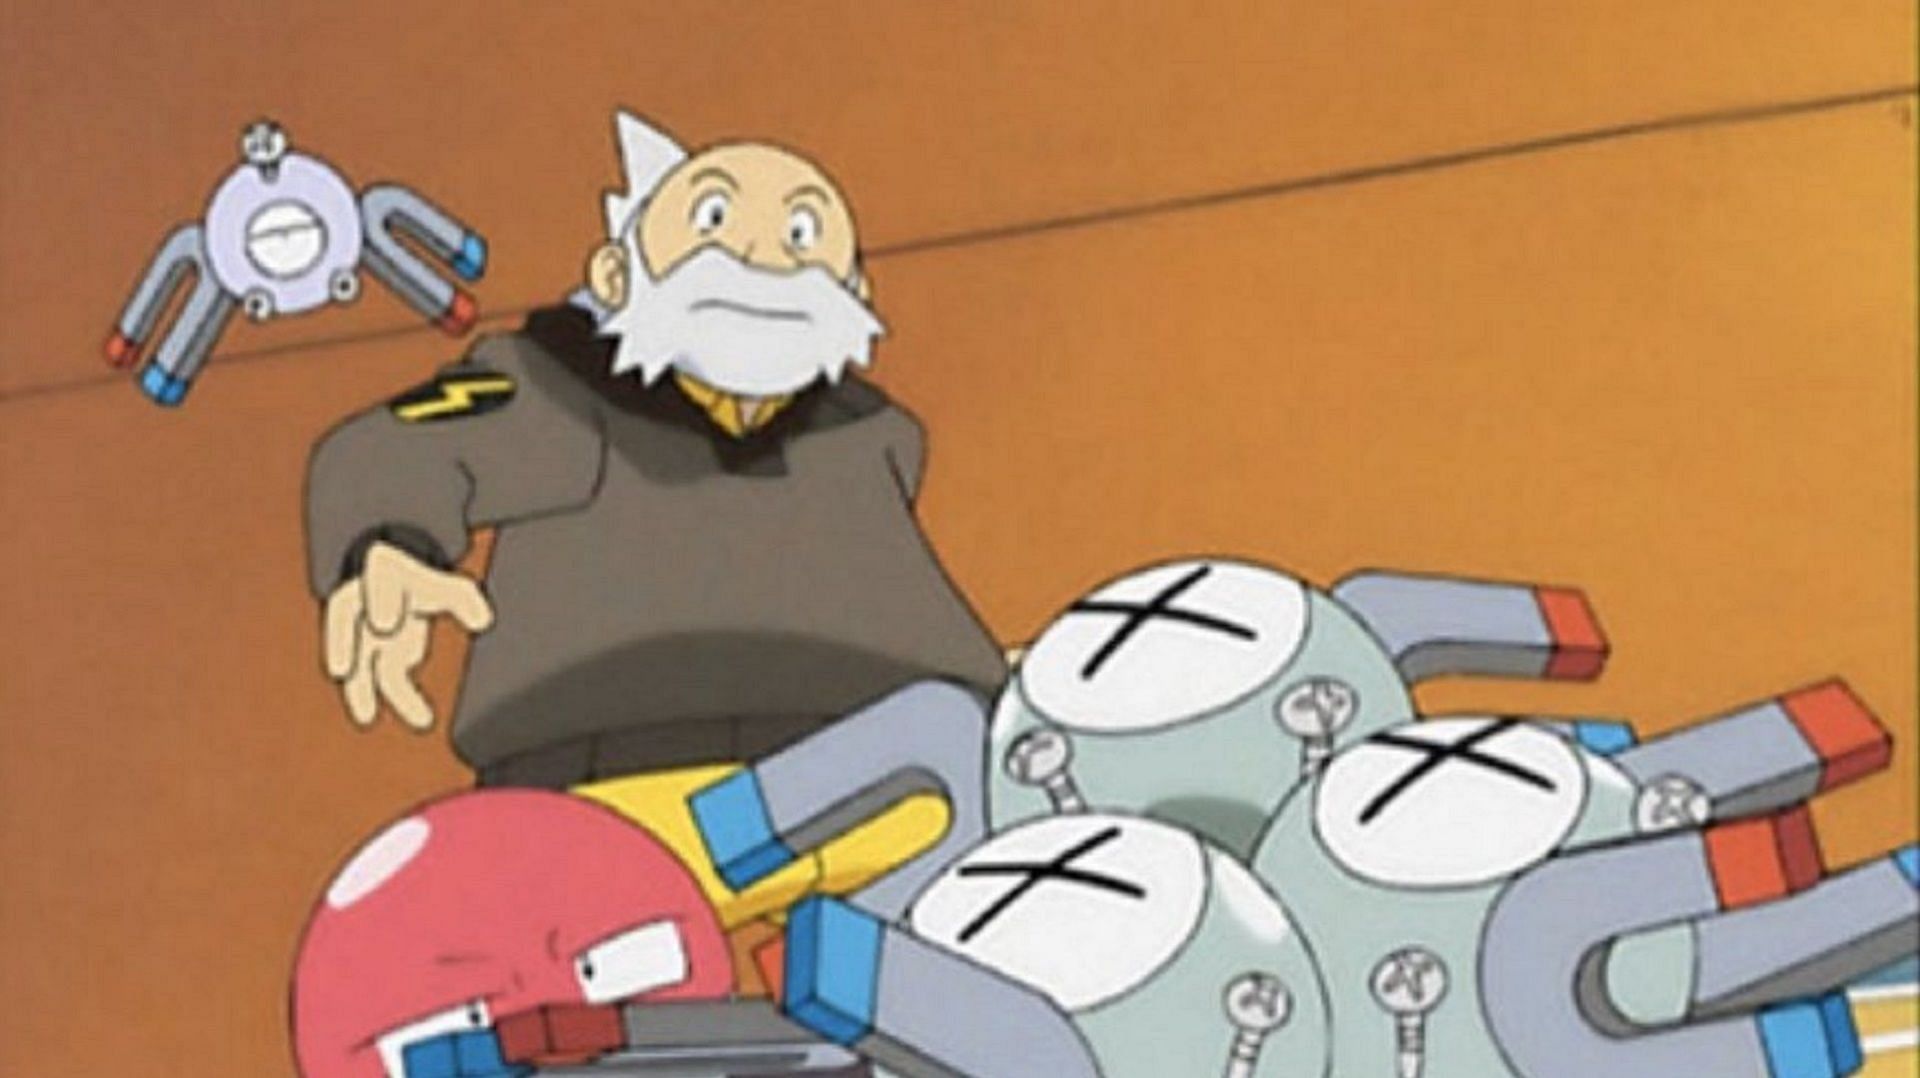 Wattson&#039;s team of Electric Pokemon didn&#039;t stand a chance against Pikachu (Image via The Pokemon Company)